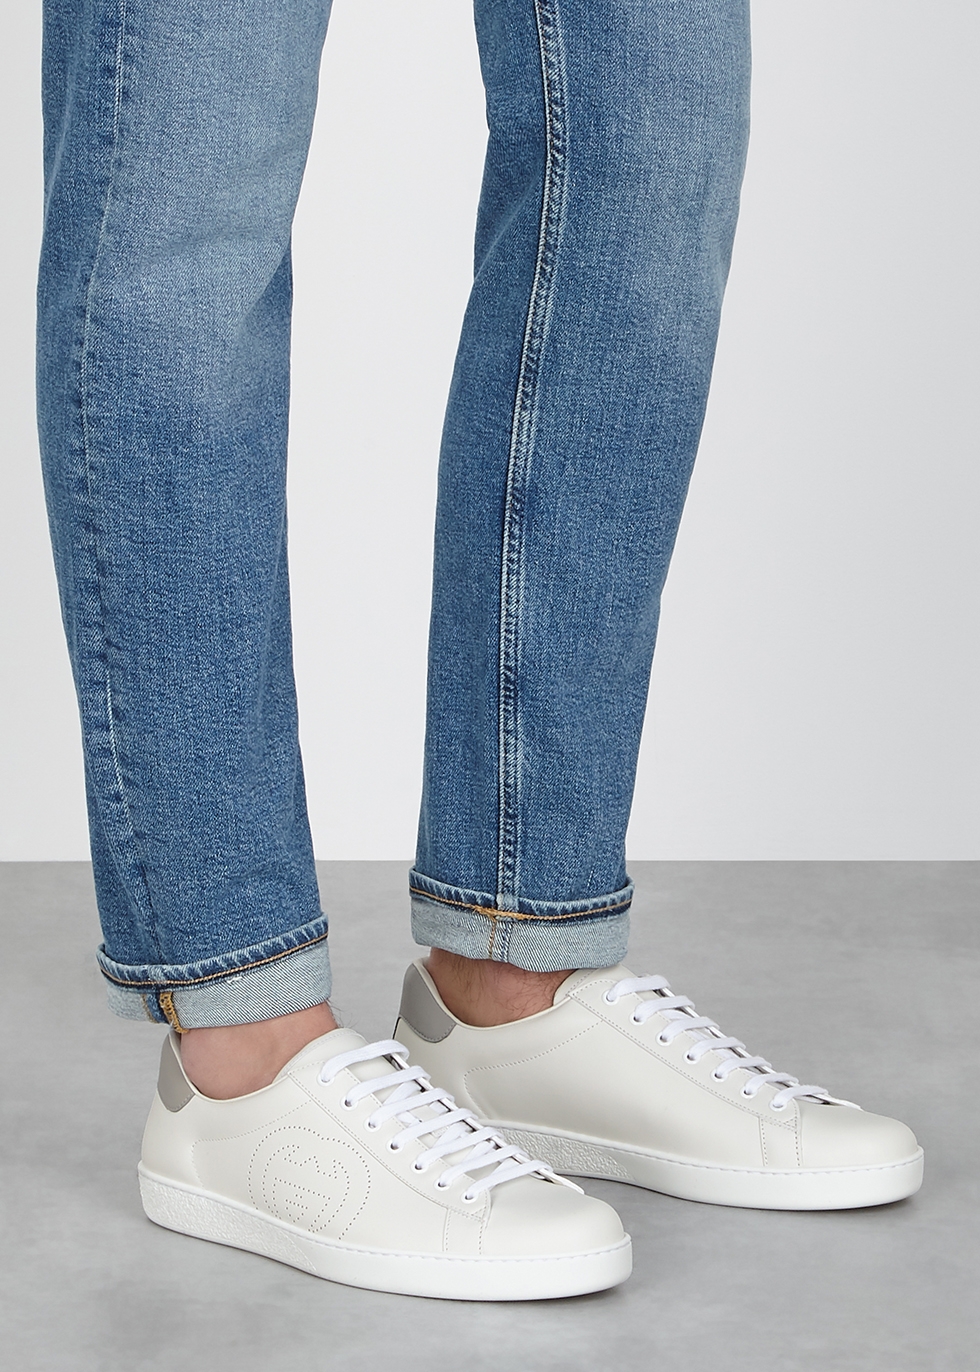 Ace white leather sneakers - Harvey Nichols